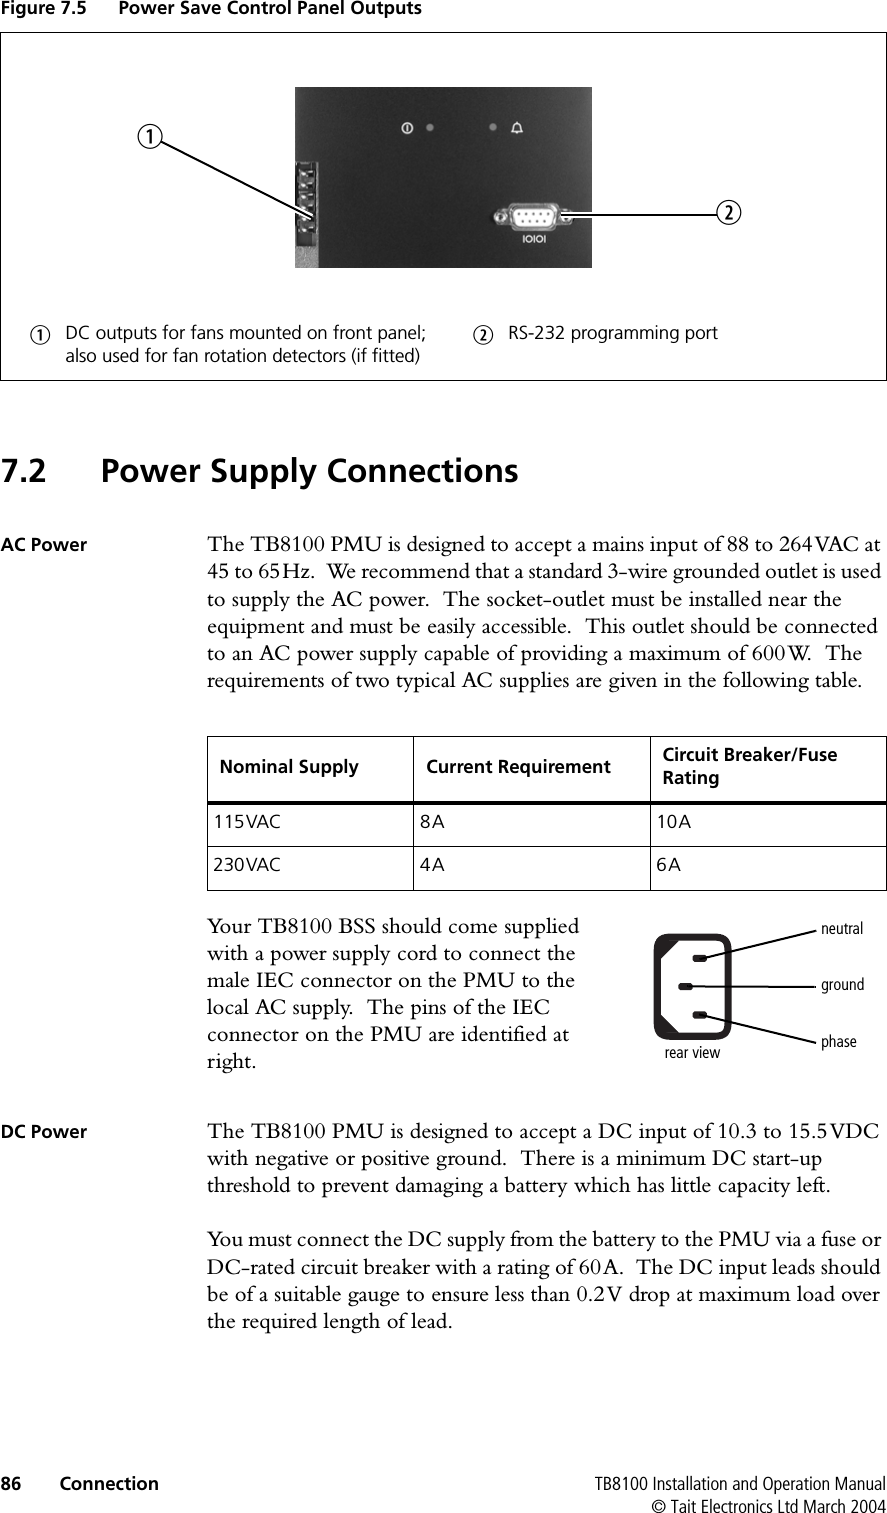 86 Connection TB8100 Installation and Operation Manual© Tait Electronics Ltd March 20047.2 Power Supply ConnectionsAC Power The TB8100 PMU is designed to accept a mains input of 88 to 264VAC at 45 to 65Hz.  We recommend that a standard 3-wire grounded outlet is used to supply the AC power.  The socket-outlet must be installed near the equipment and must be easily accessible.  This outlet should be connected to an AC power supply capable of providing a maximum of 600W.  The requirements of two typical AC supplies are given in the following table.Your TB8100 BSS should come supplied with a power supply cord to connect the male IEC connector on the PMU to the local AC supply.  The pins of the IEC connector on the PMU are identified at right.DC Power The TB8100 PMU is designed to accept a DC input of 10.3 to 15.5VDC with negative or positive ground.  There is a minimum DC start-up threshold to prevent damaging a battery which has little capacity left.You must connect the DC supply from the battery to the PMU via a fuse or DC-rated circuit breaker with a rating of 60A.  The DC input leads should be of a suitable gauge to ensure less than 0.2V drop at maximum load over the required length of lead.  Figure 7.5 Power Save Control Panel OutputsbDC outputs for fans mounted on front panel;also used for fan rotation detectors (if fitted)cRS-232 programming portbcNominal Supply Current Requirement Circuit Breaker/Fuse Rating115VAC 8A 10A230VAC 4A 6Aphaseneutralgroundrear view